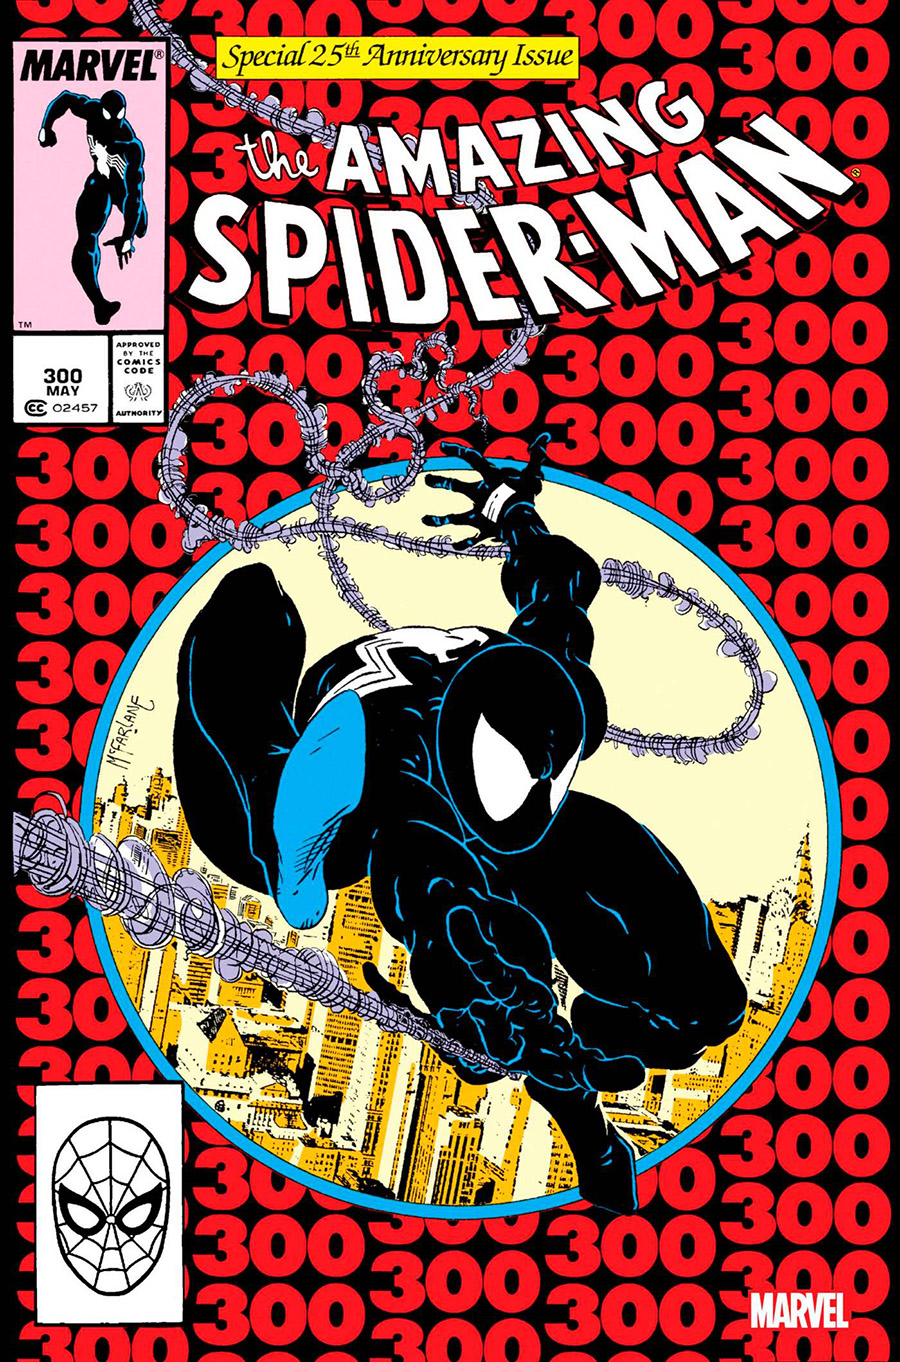 Amazing Spider-Man #300 Cover G Facsimile Edition Variant Foil Cover